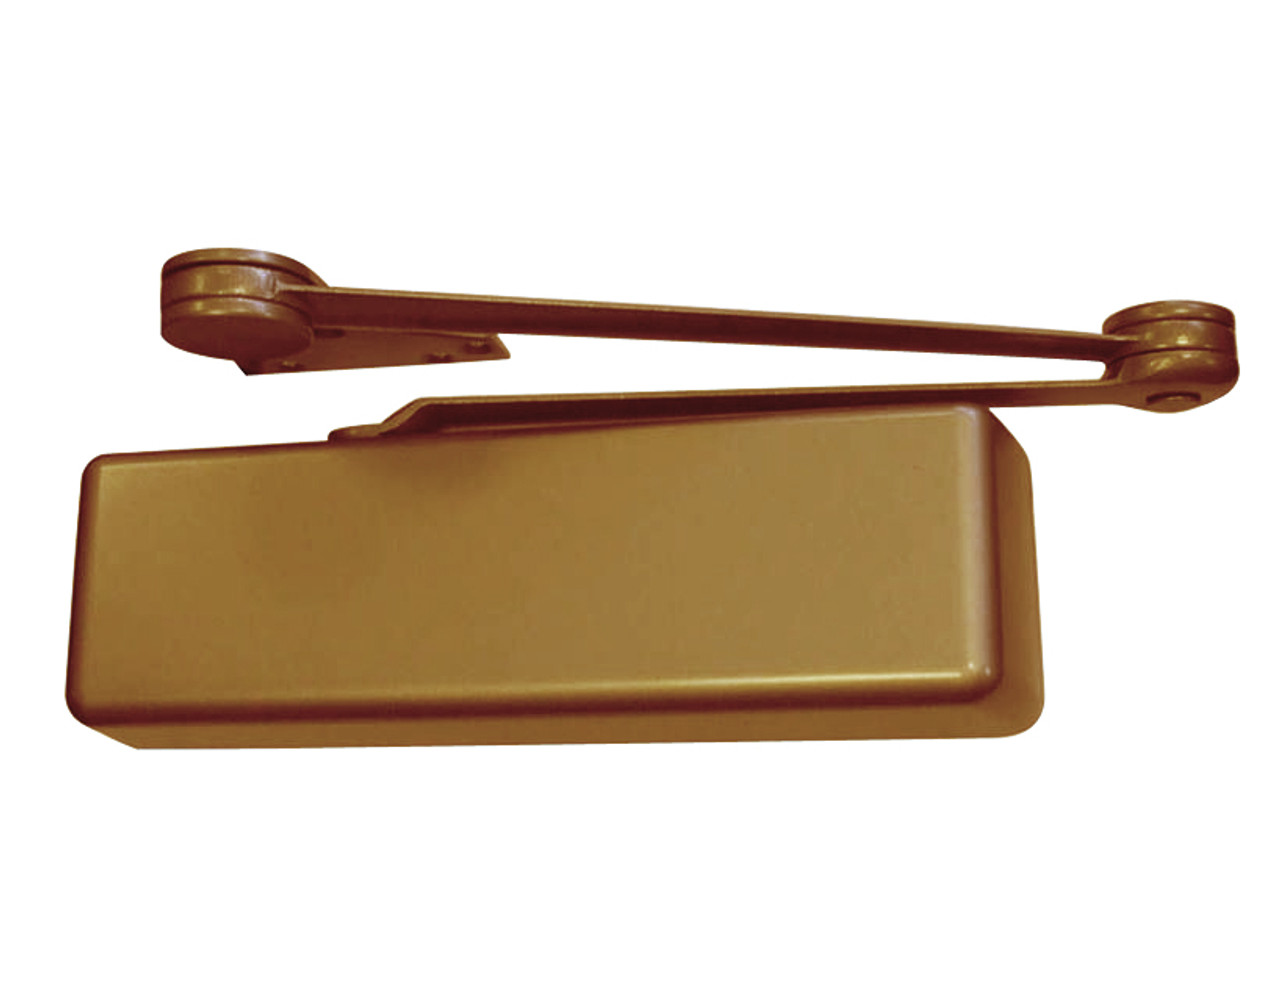 4213T-STD-LH-STAT LCN Door Closer with Standard Arm in Statuary Finish